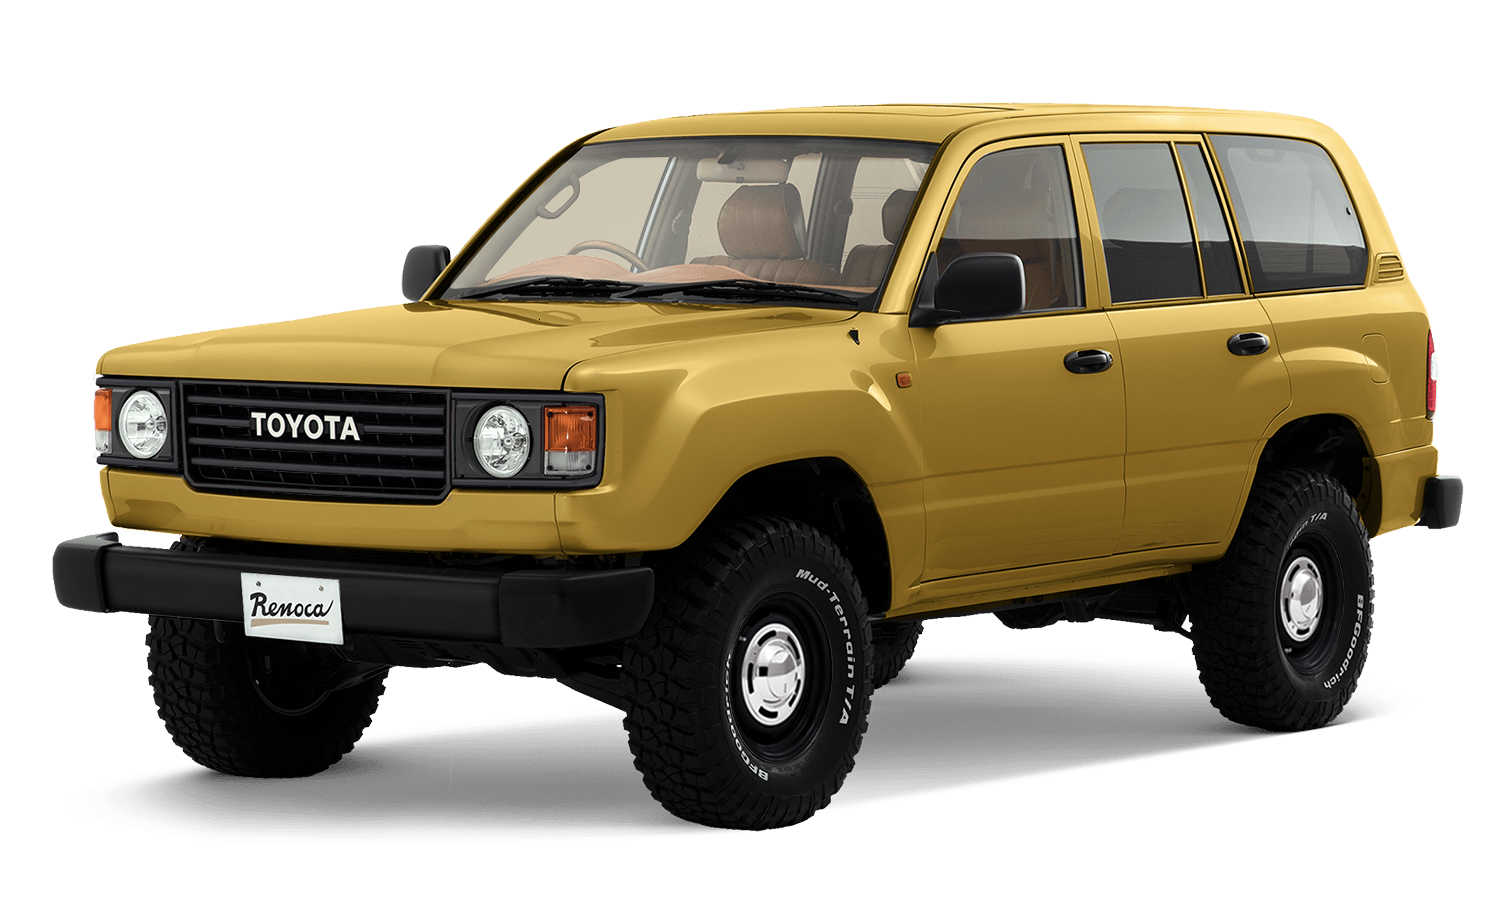 Toyota Land Cruisers with Renault's retro look look great